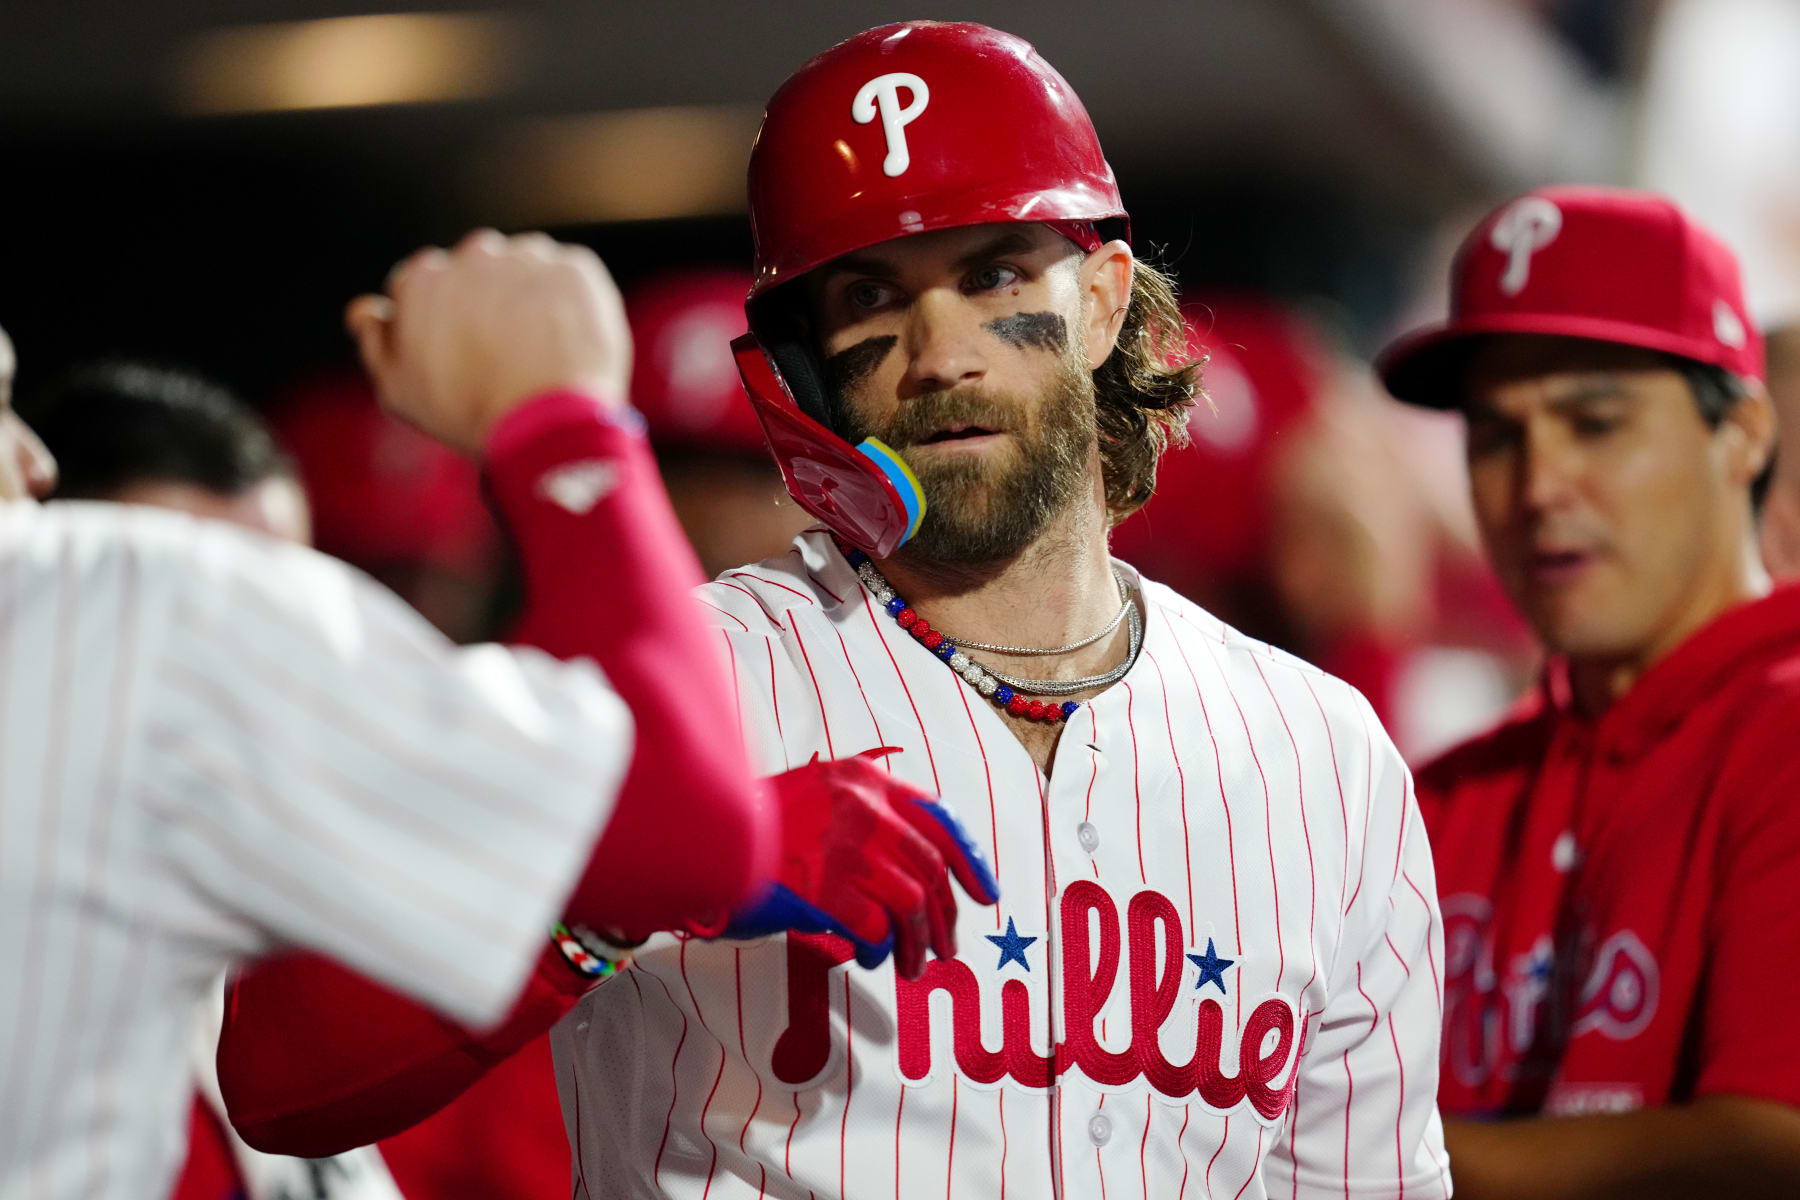 Phillies Madness: Rd. 2 of the All-Time Phillies Bracket